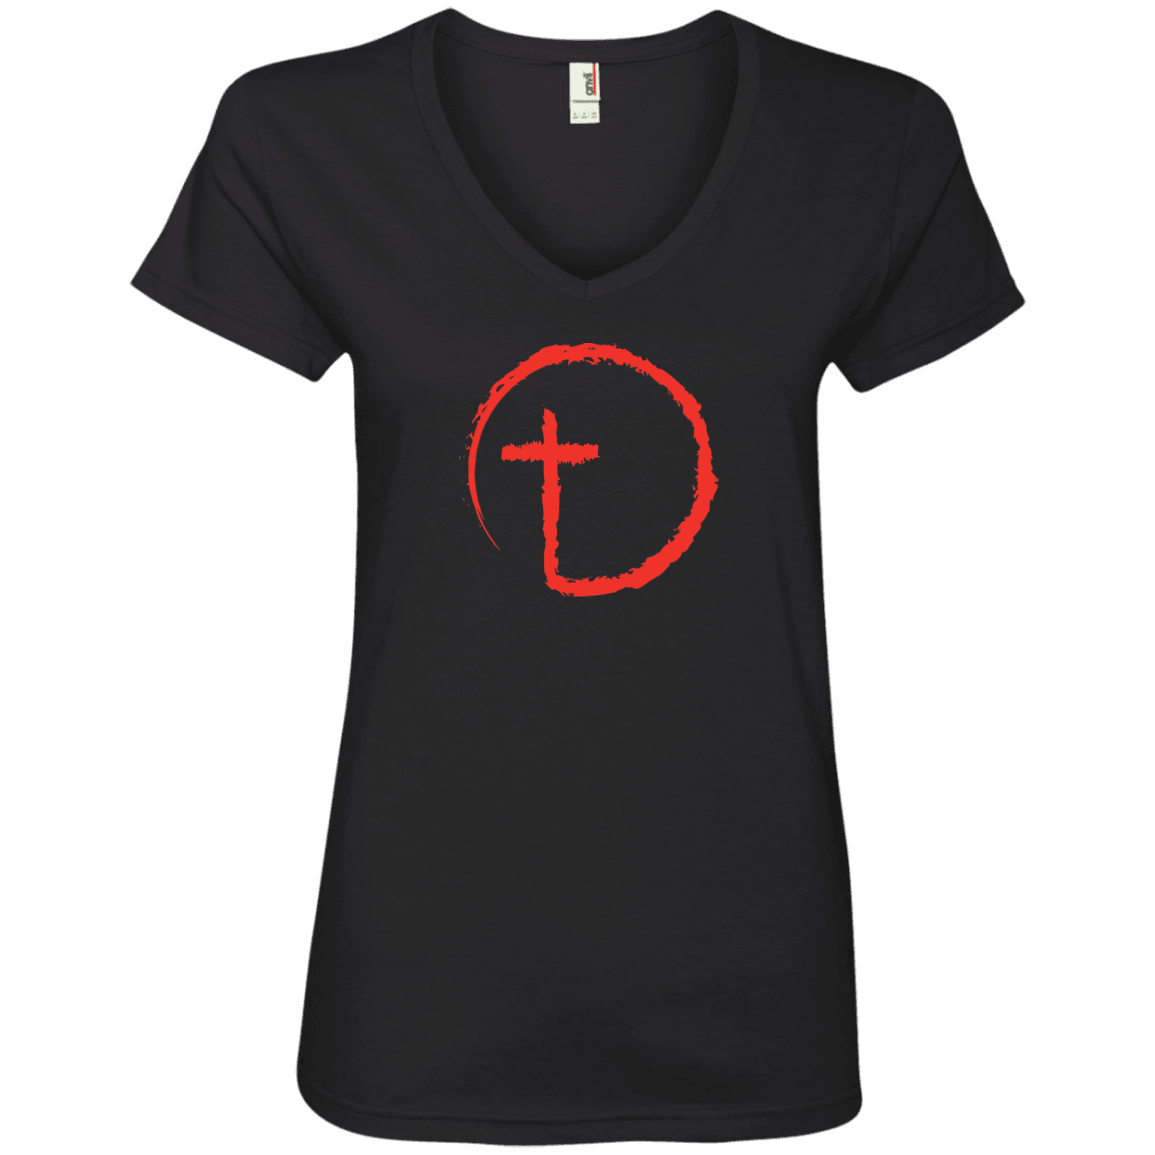 Designs by MyUtopia Shout Out:Abstract Cross Circle Ladies' V-Neck T-Shirt,Black / S,Ladies T-Shirts